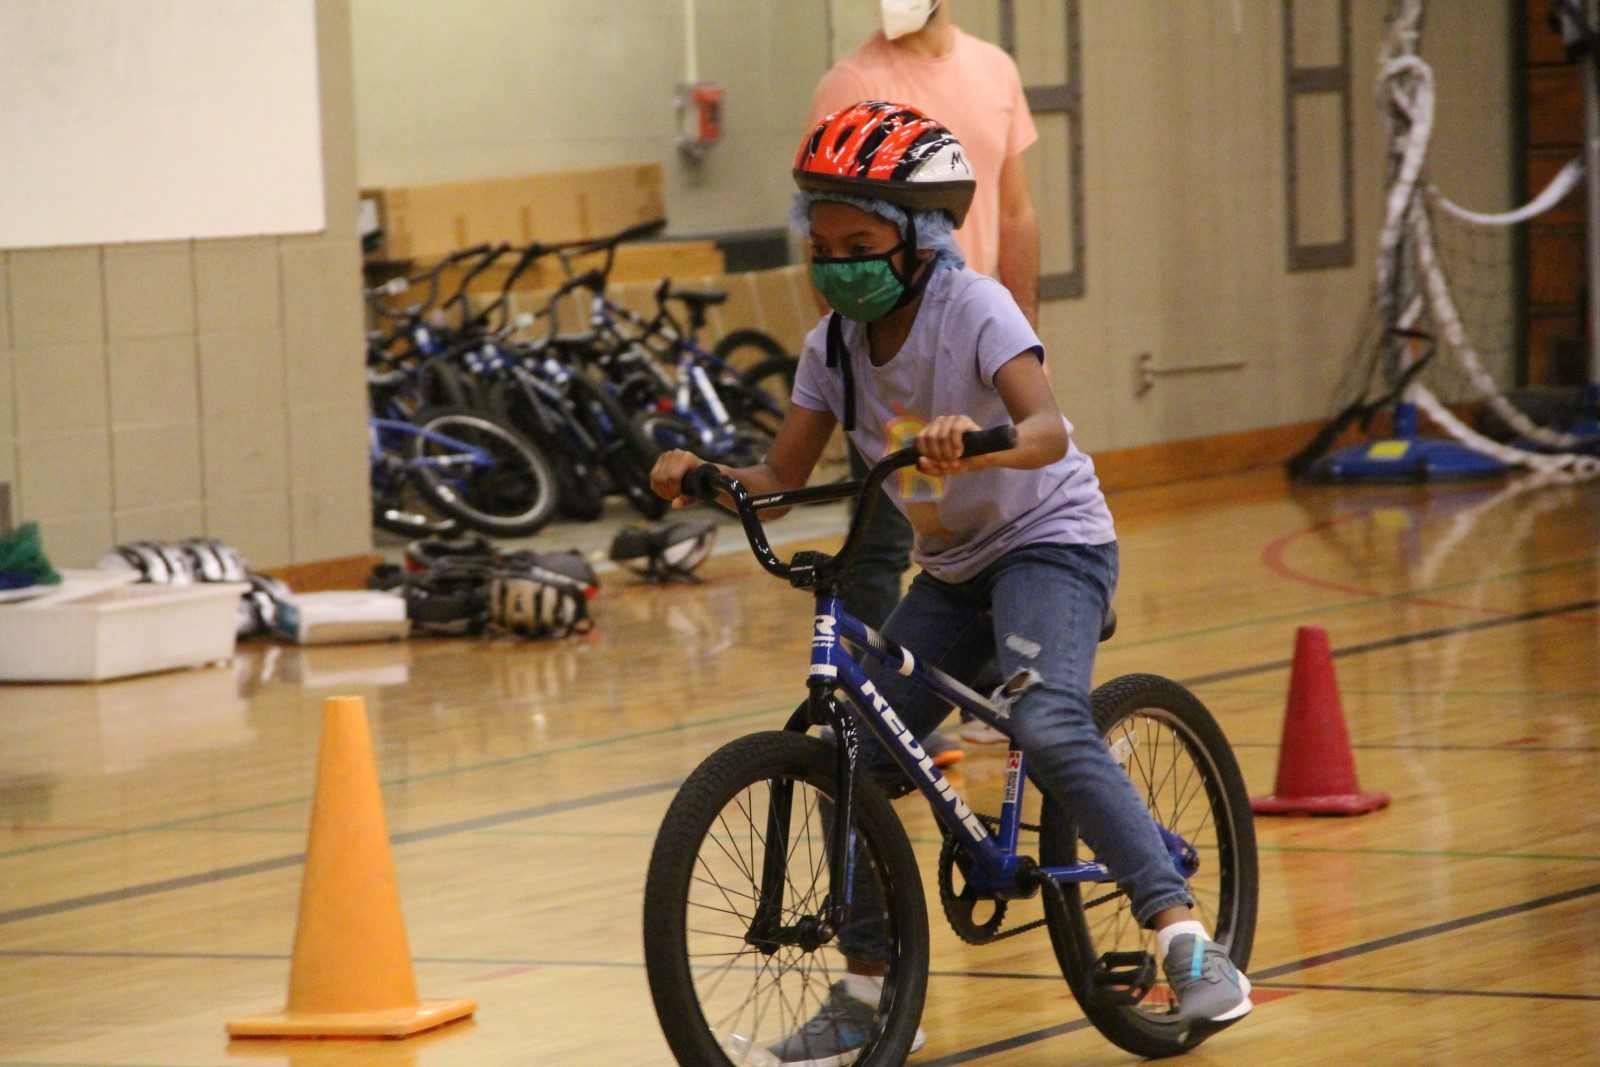 A student riding a bike in a gym